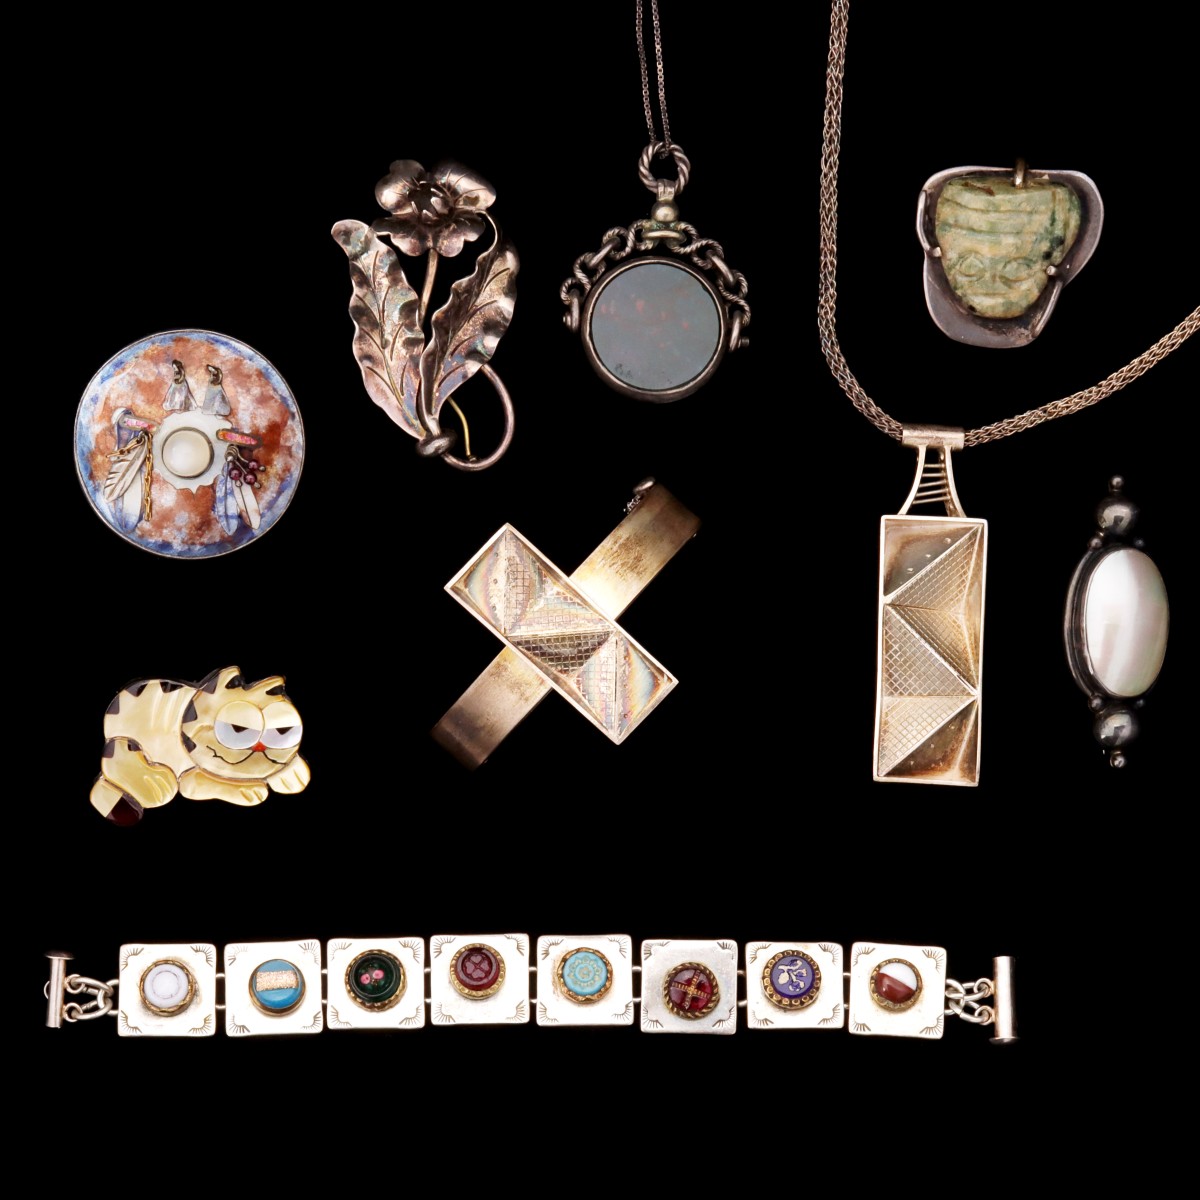 GEORG JENSEN AND OTHER MODERNIST STERLING JEWELRY